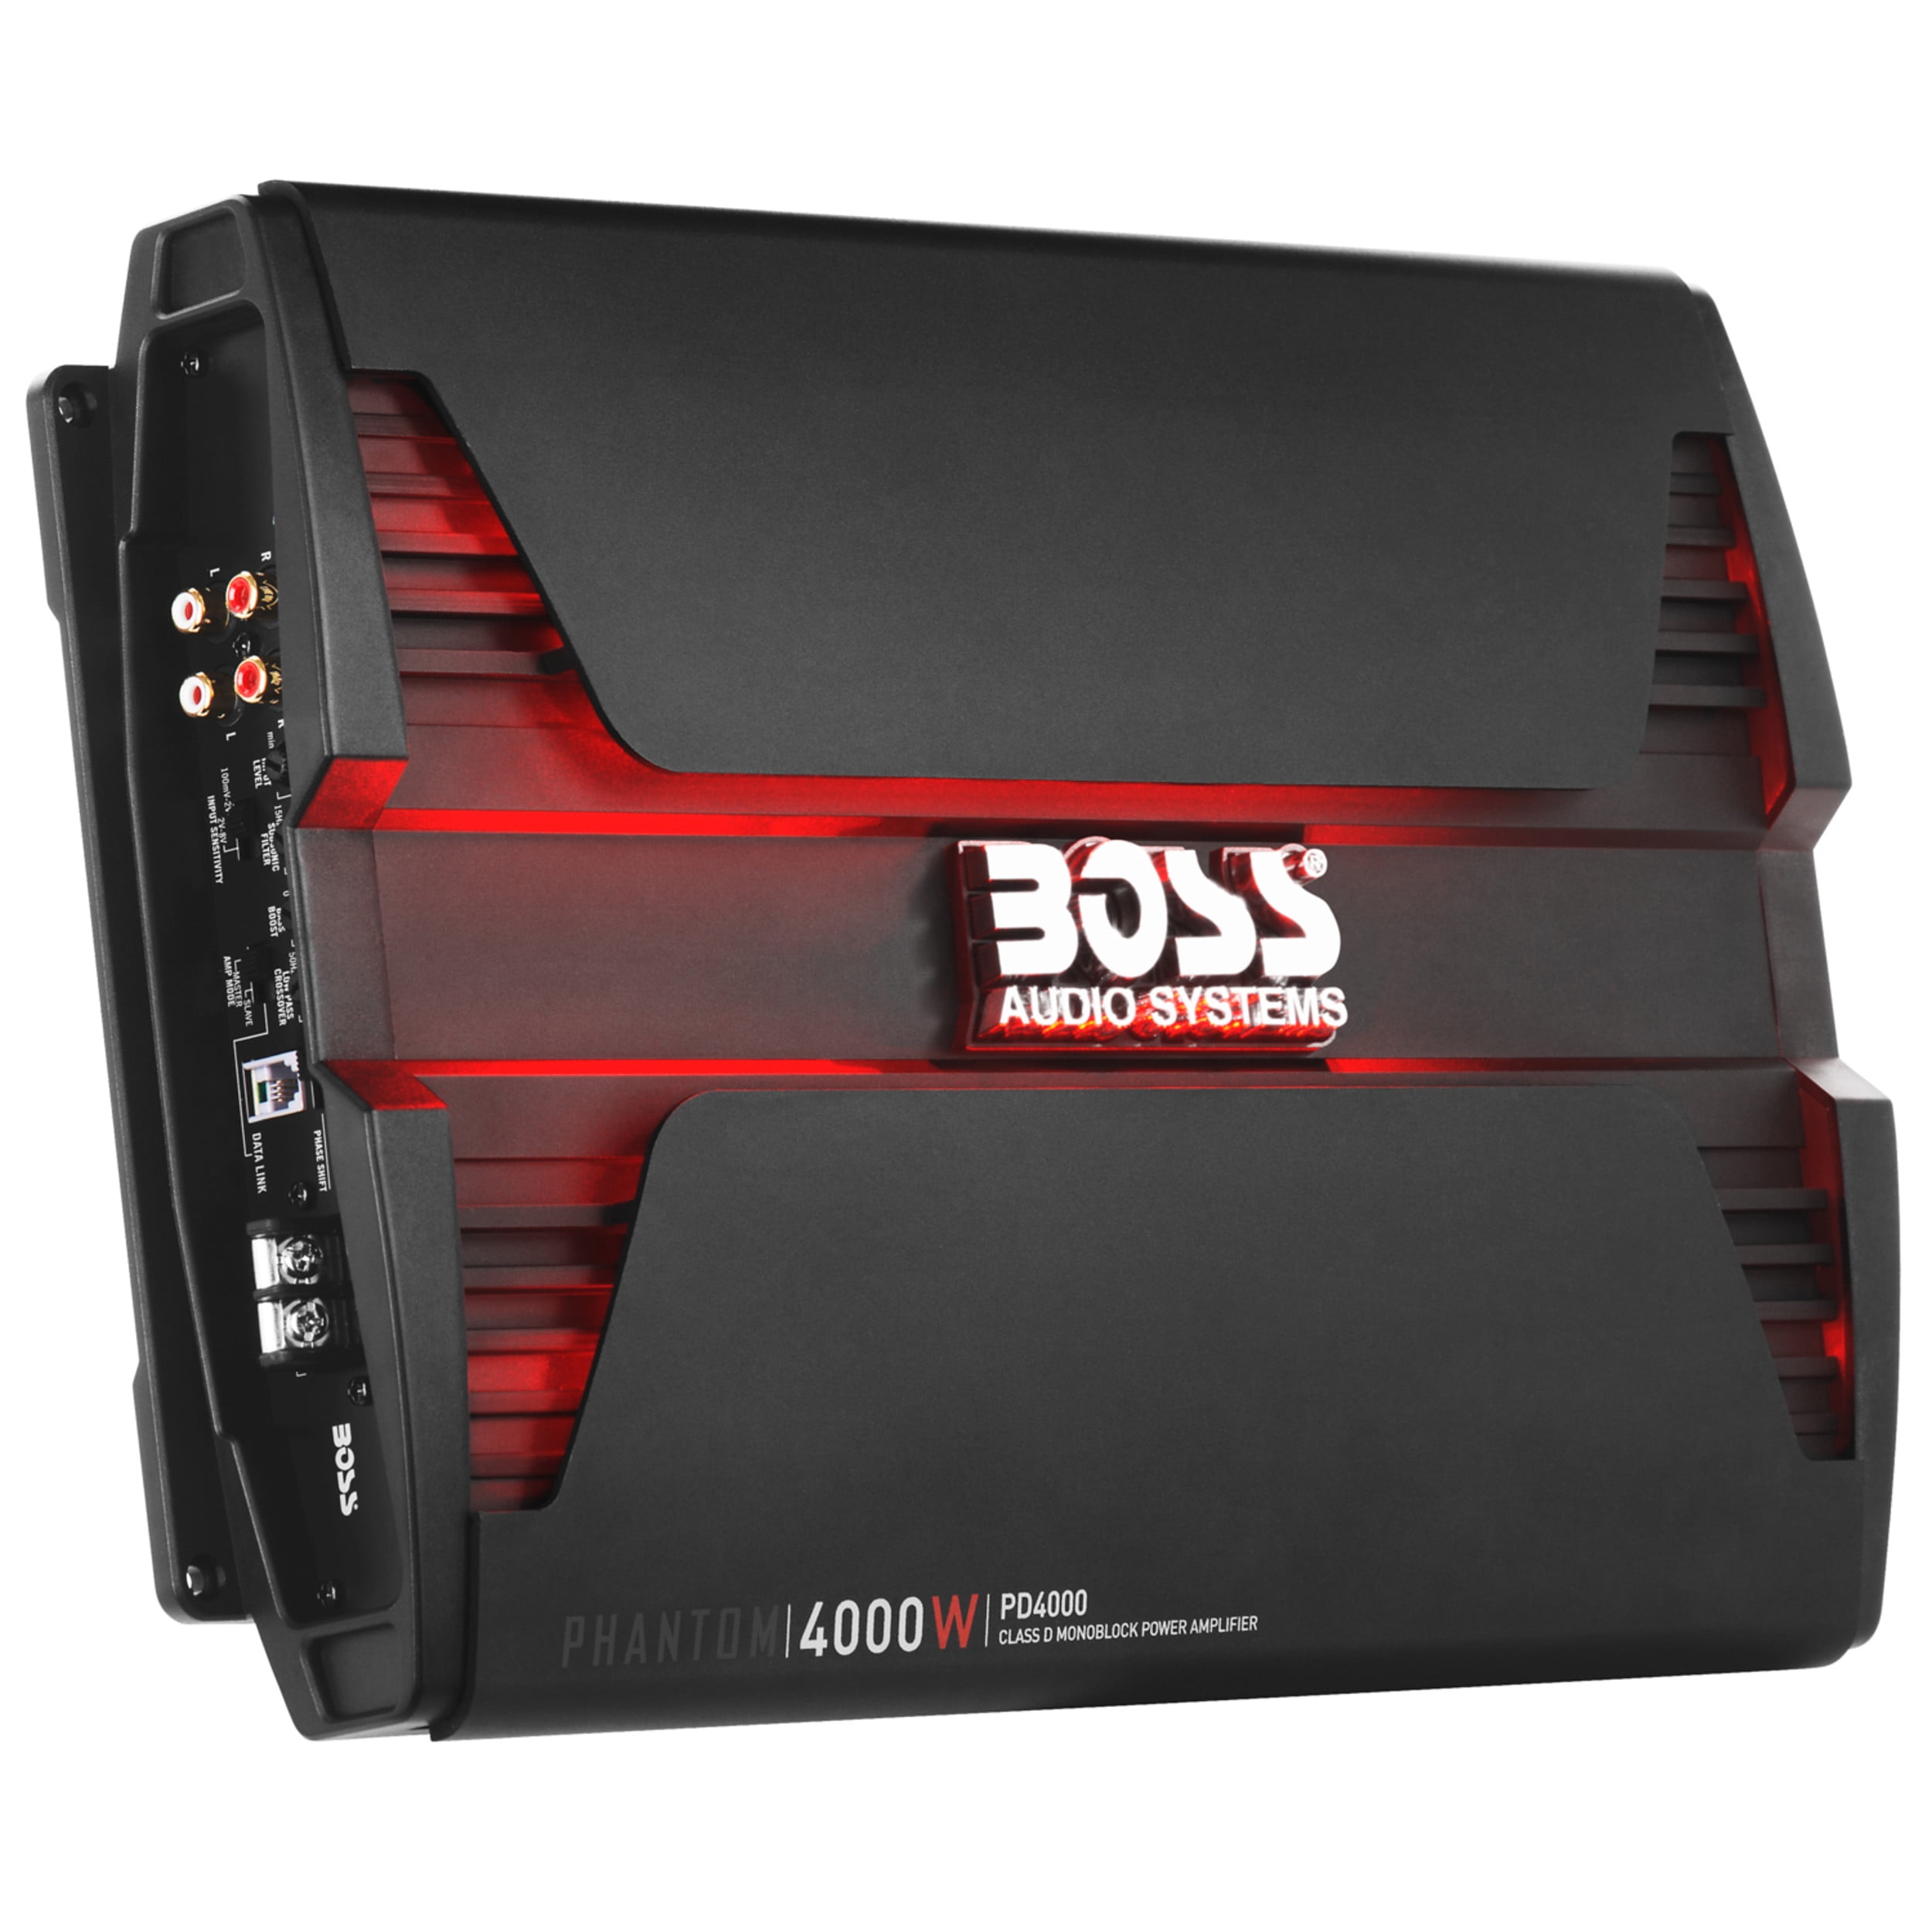 BOSS Audio Systems PD4000 Car Amplifier with Remote Subwoofer Control 